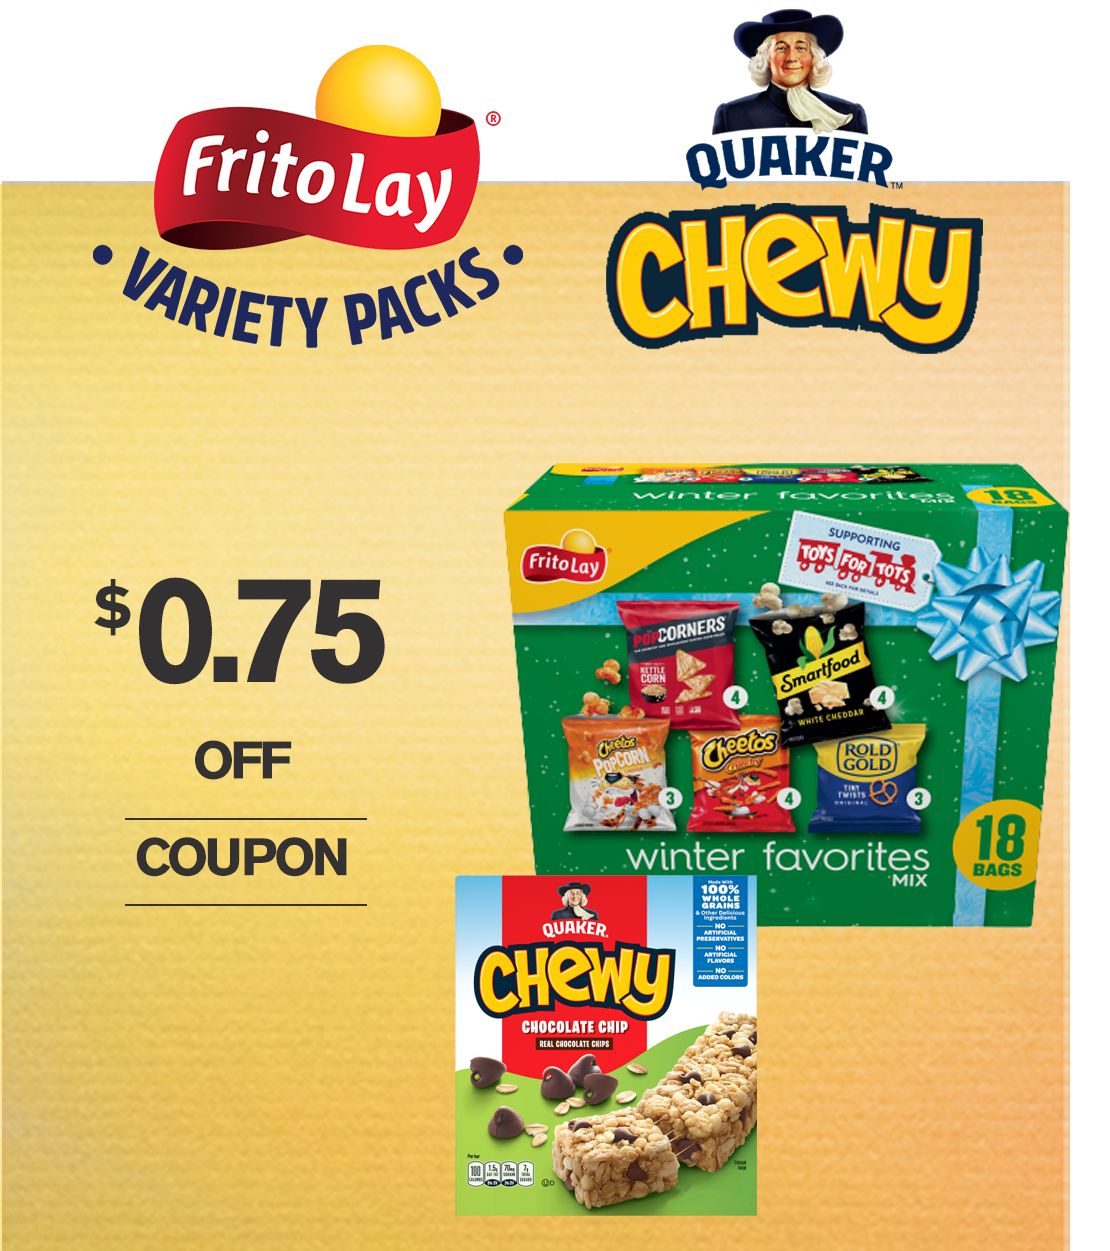 Save $0.75 Quaker Chewy and Frito-Lay